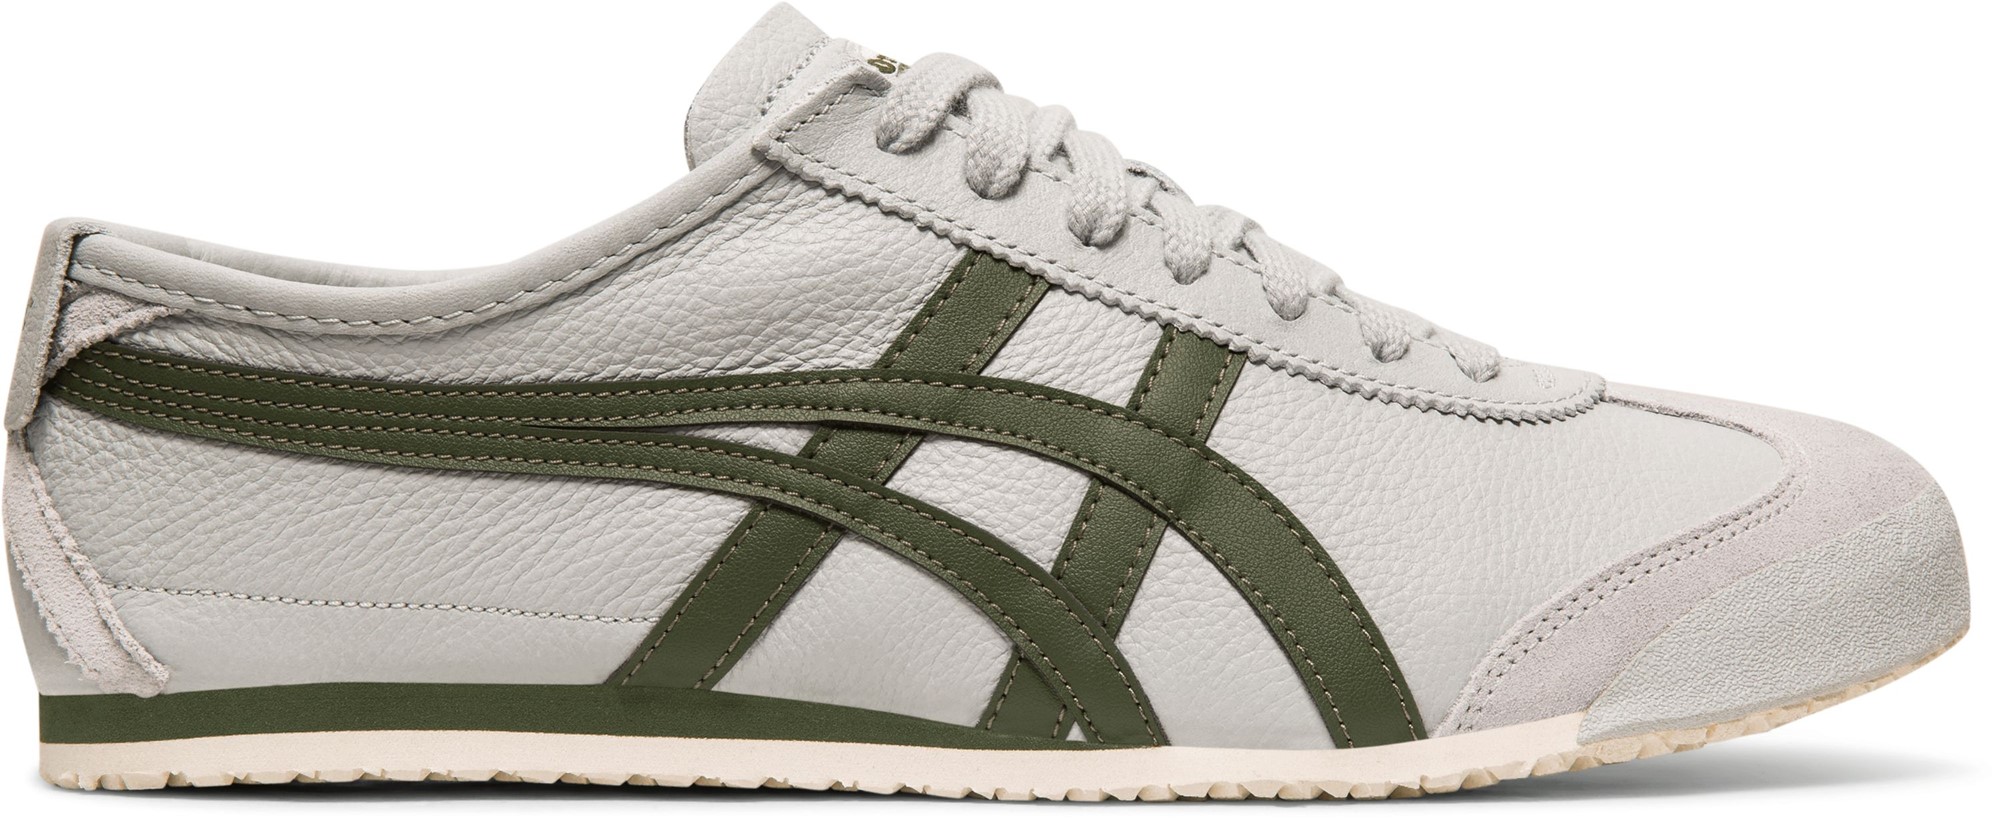 In celebration of another 66, from Onitsuka Tiger